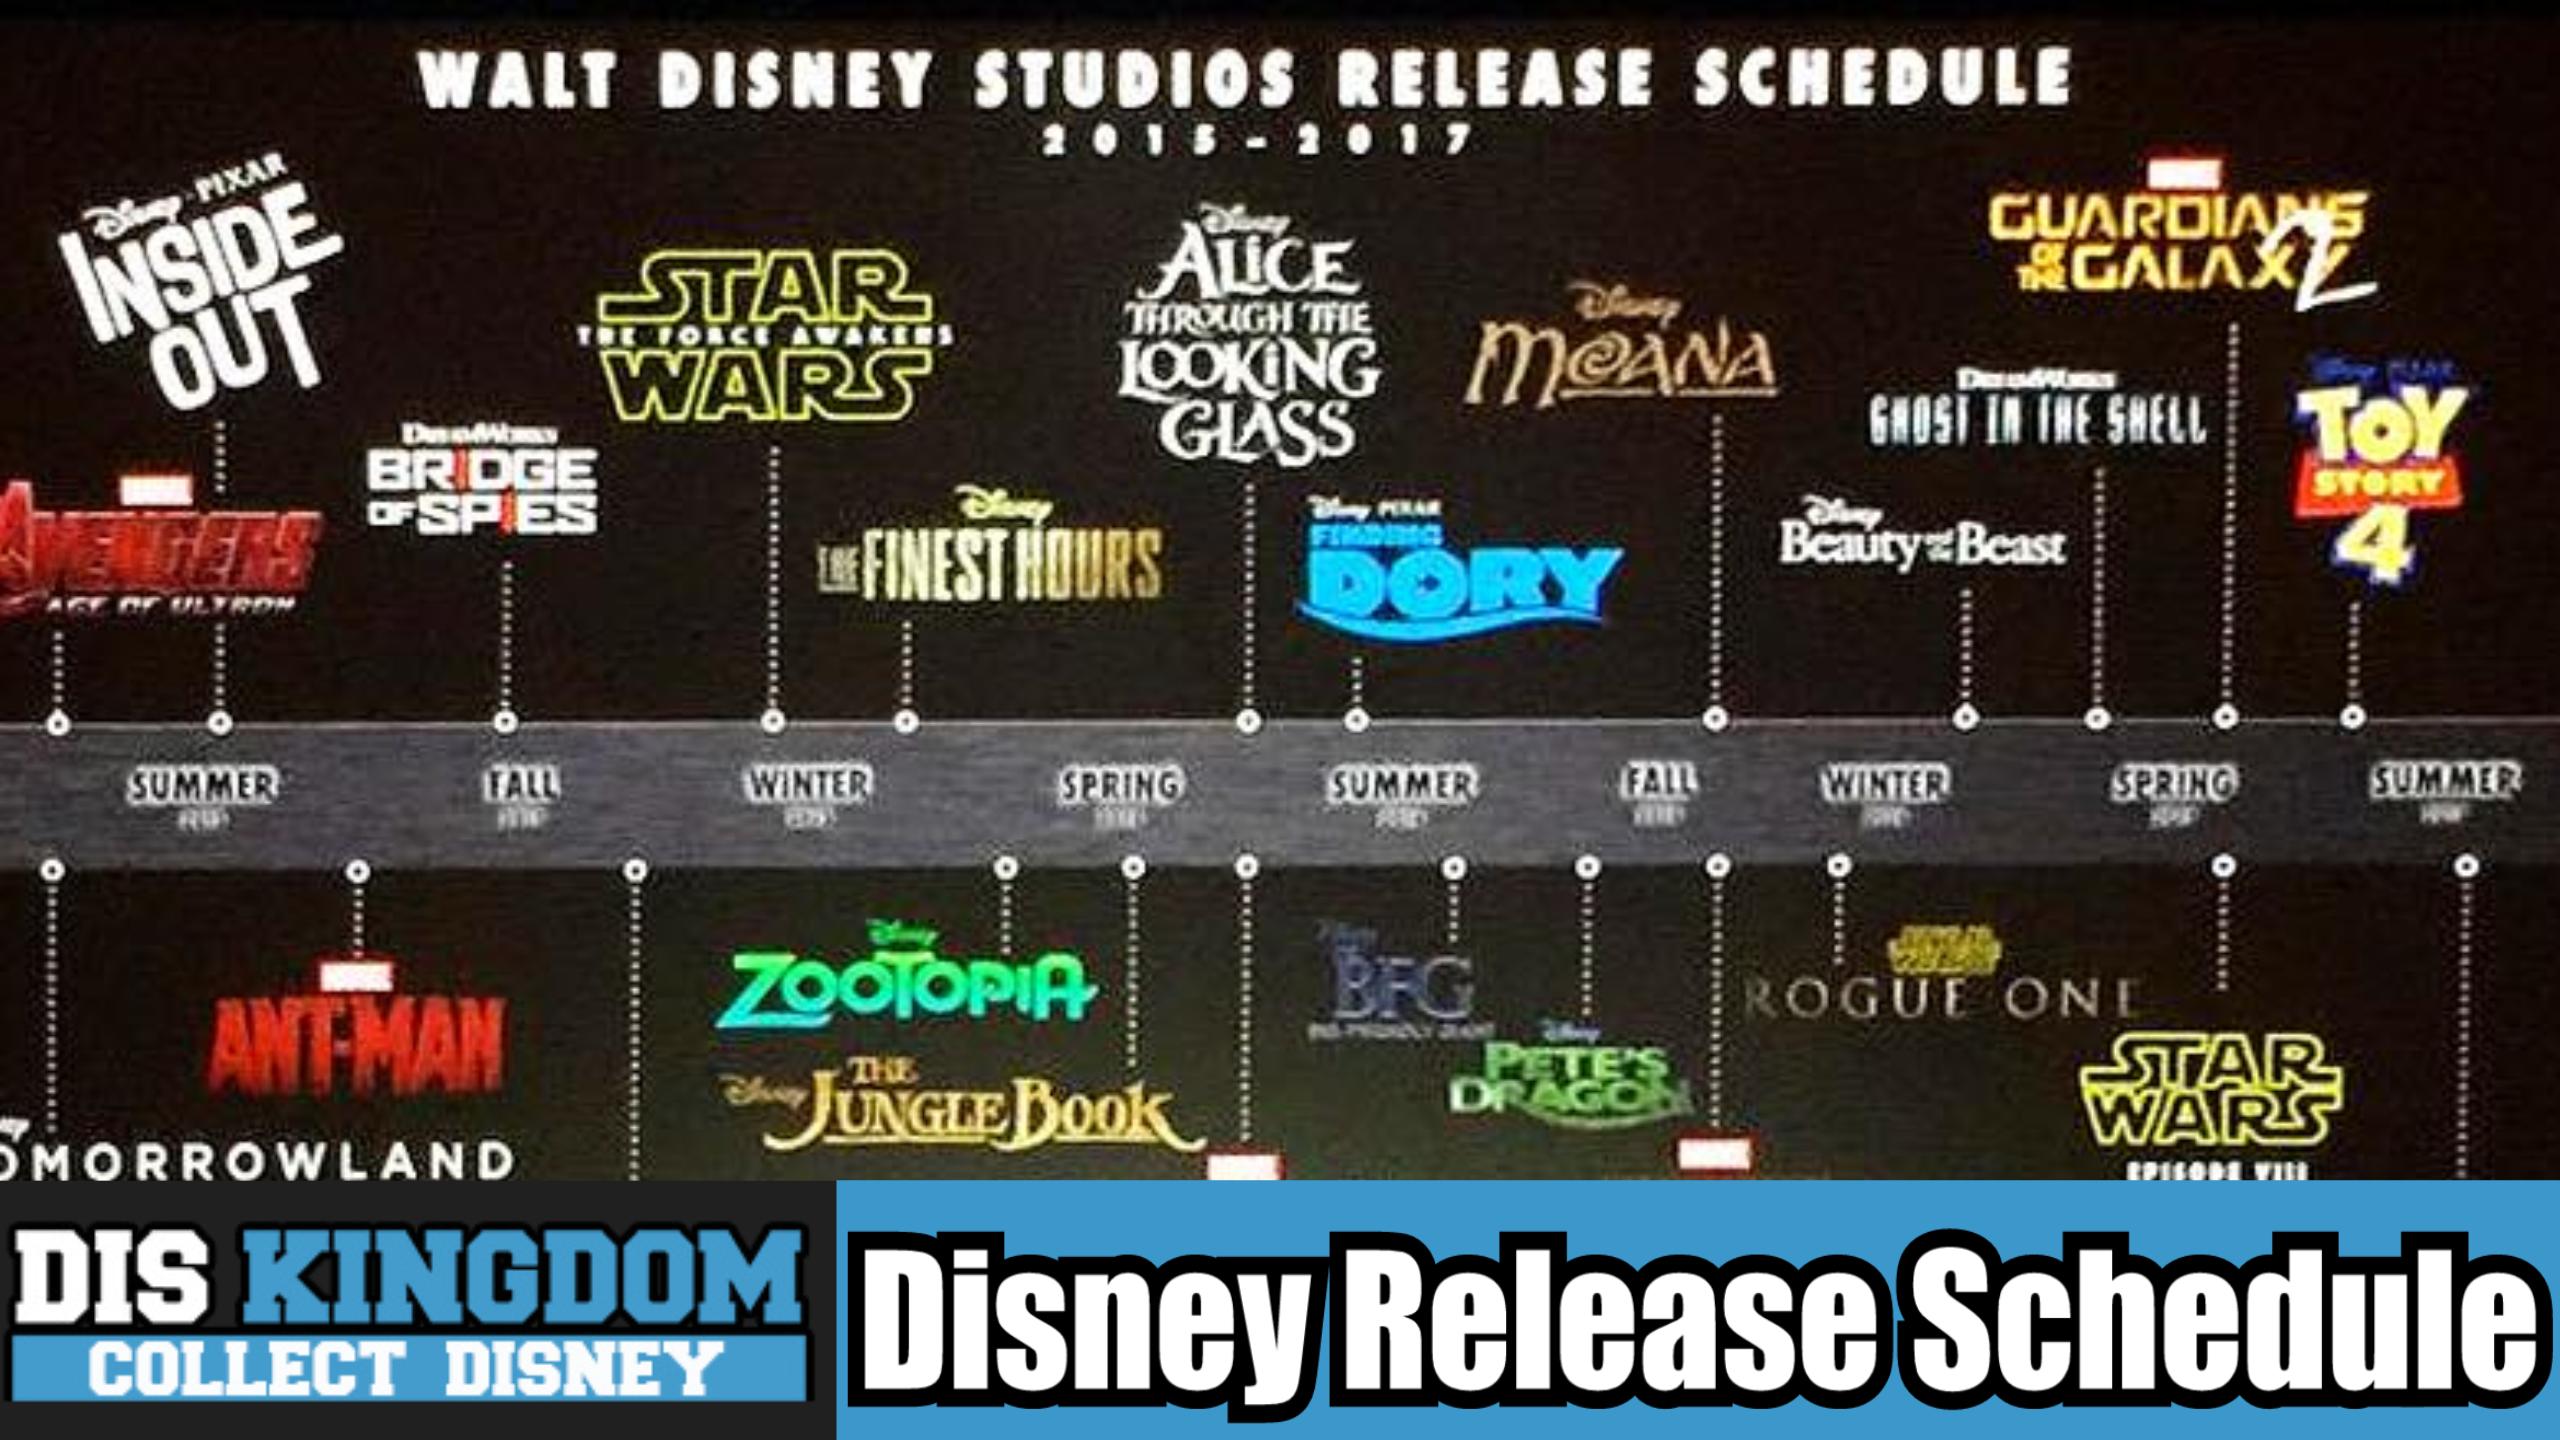 Disney's Movie Release Schedule for 2015 - 2016 Including Star Wars ...